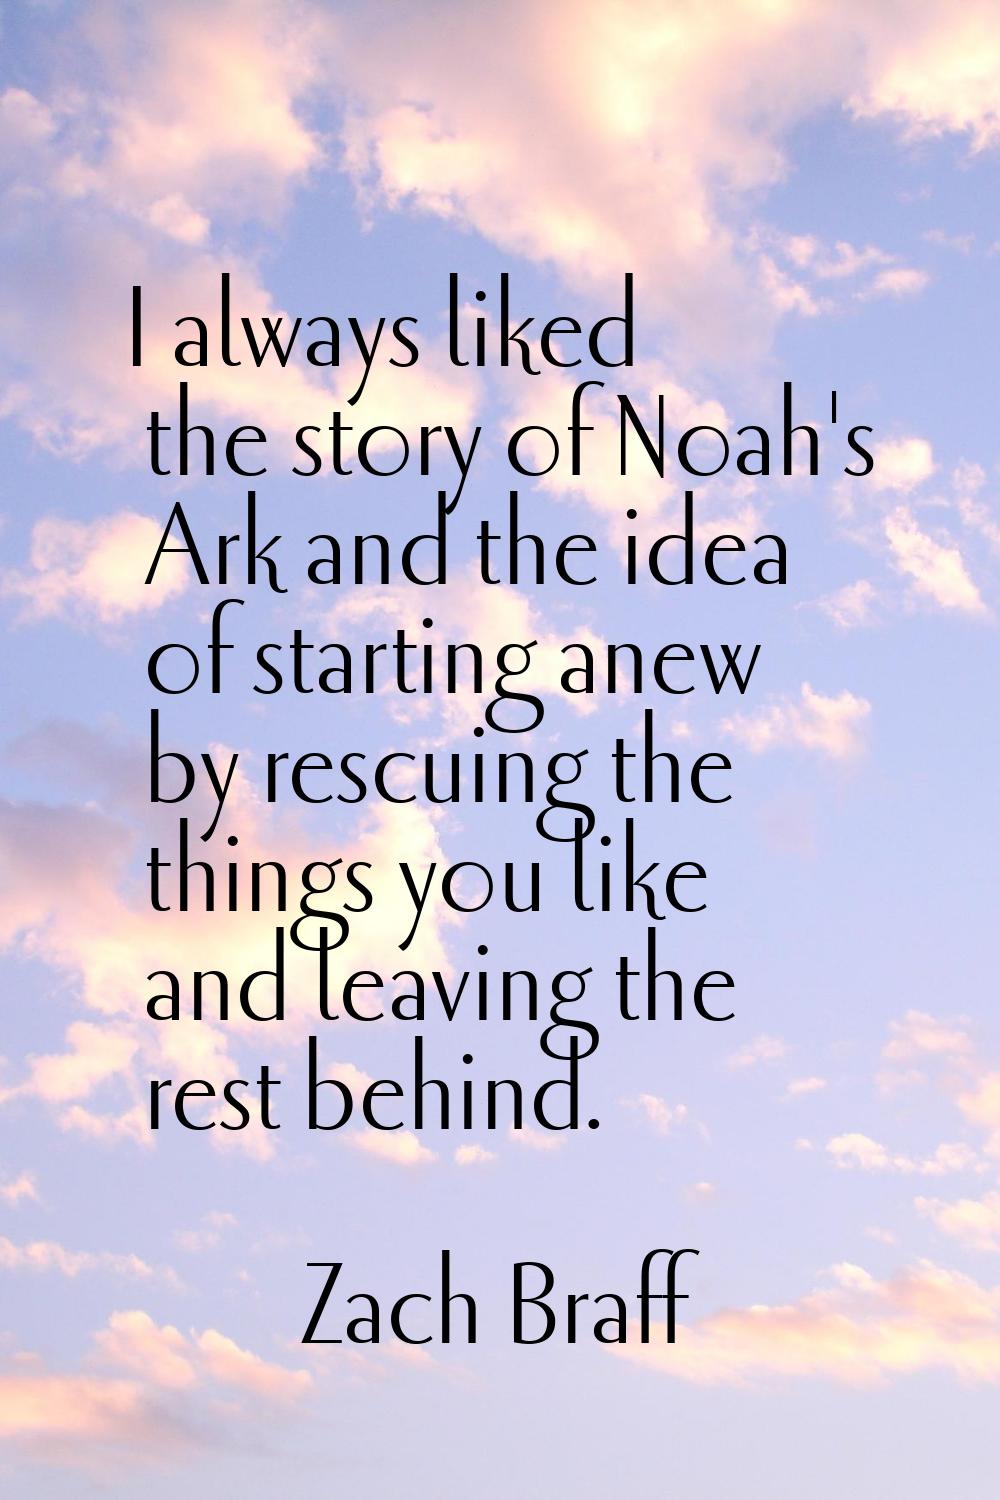 I always liked the story of Noah's Ark and the idea of starting anew by rescuing the things you lik